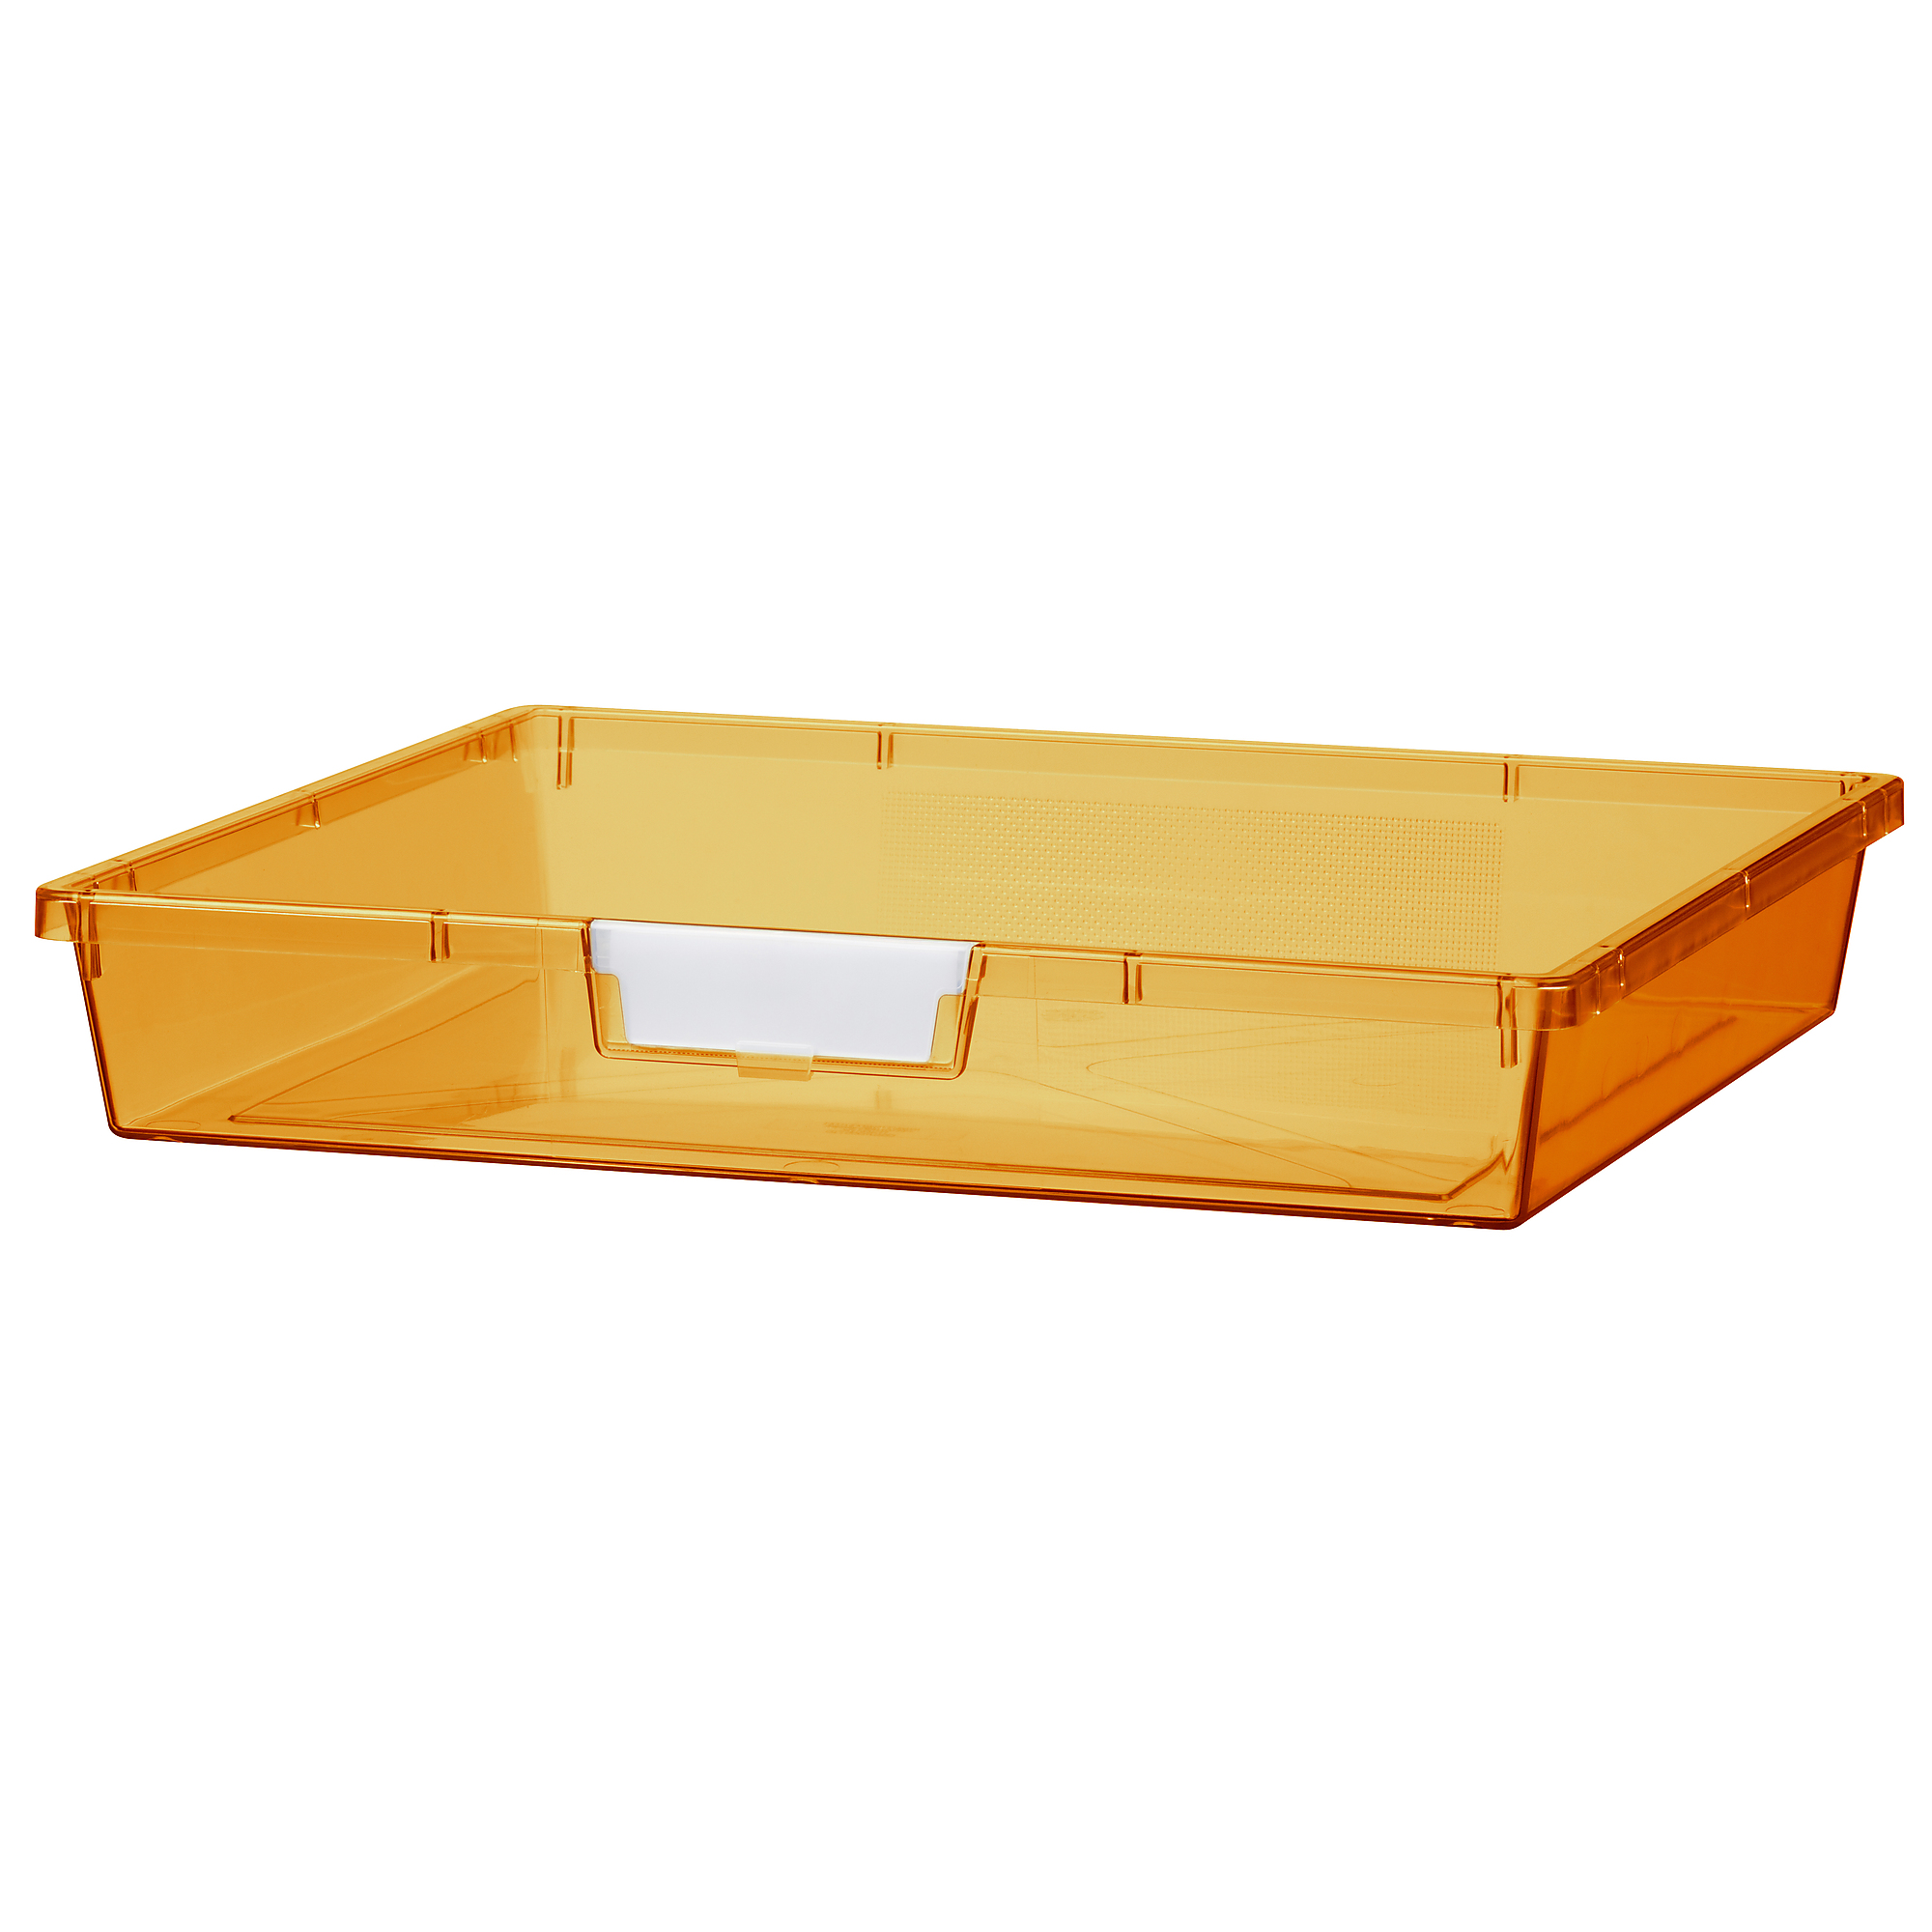 Certwood StorWerks, Wide Line Tray 3Inch in Neon Orange - 3 Pack, Included (qty.) 3, Material Plastic, Height 12 in, Model CE1956FO1